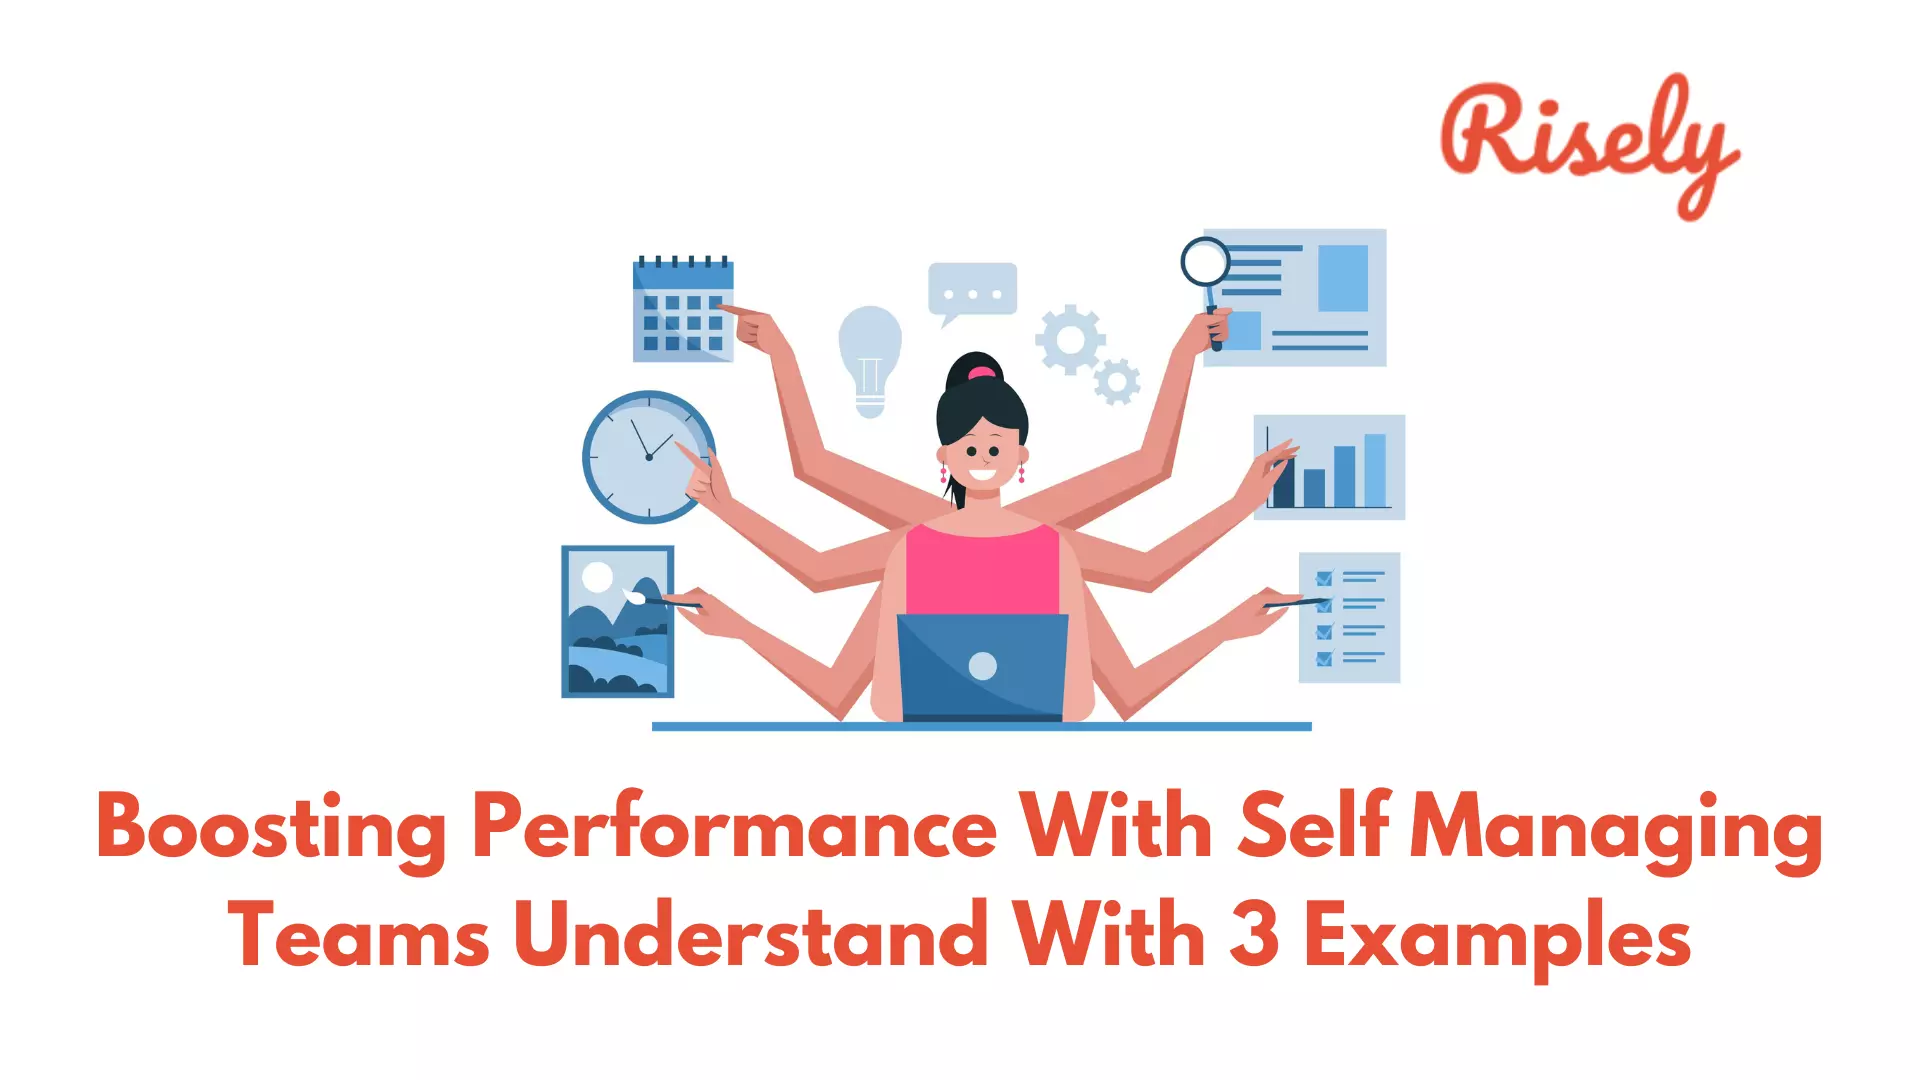 Boosting Performance With Self Managing Teams Understand With 3 Examples